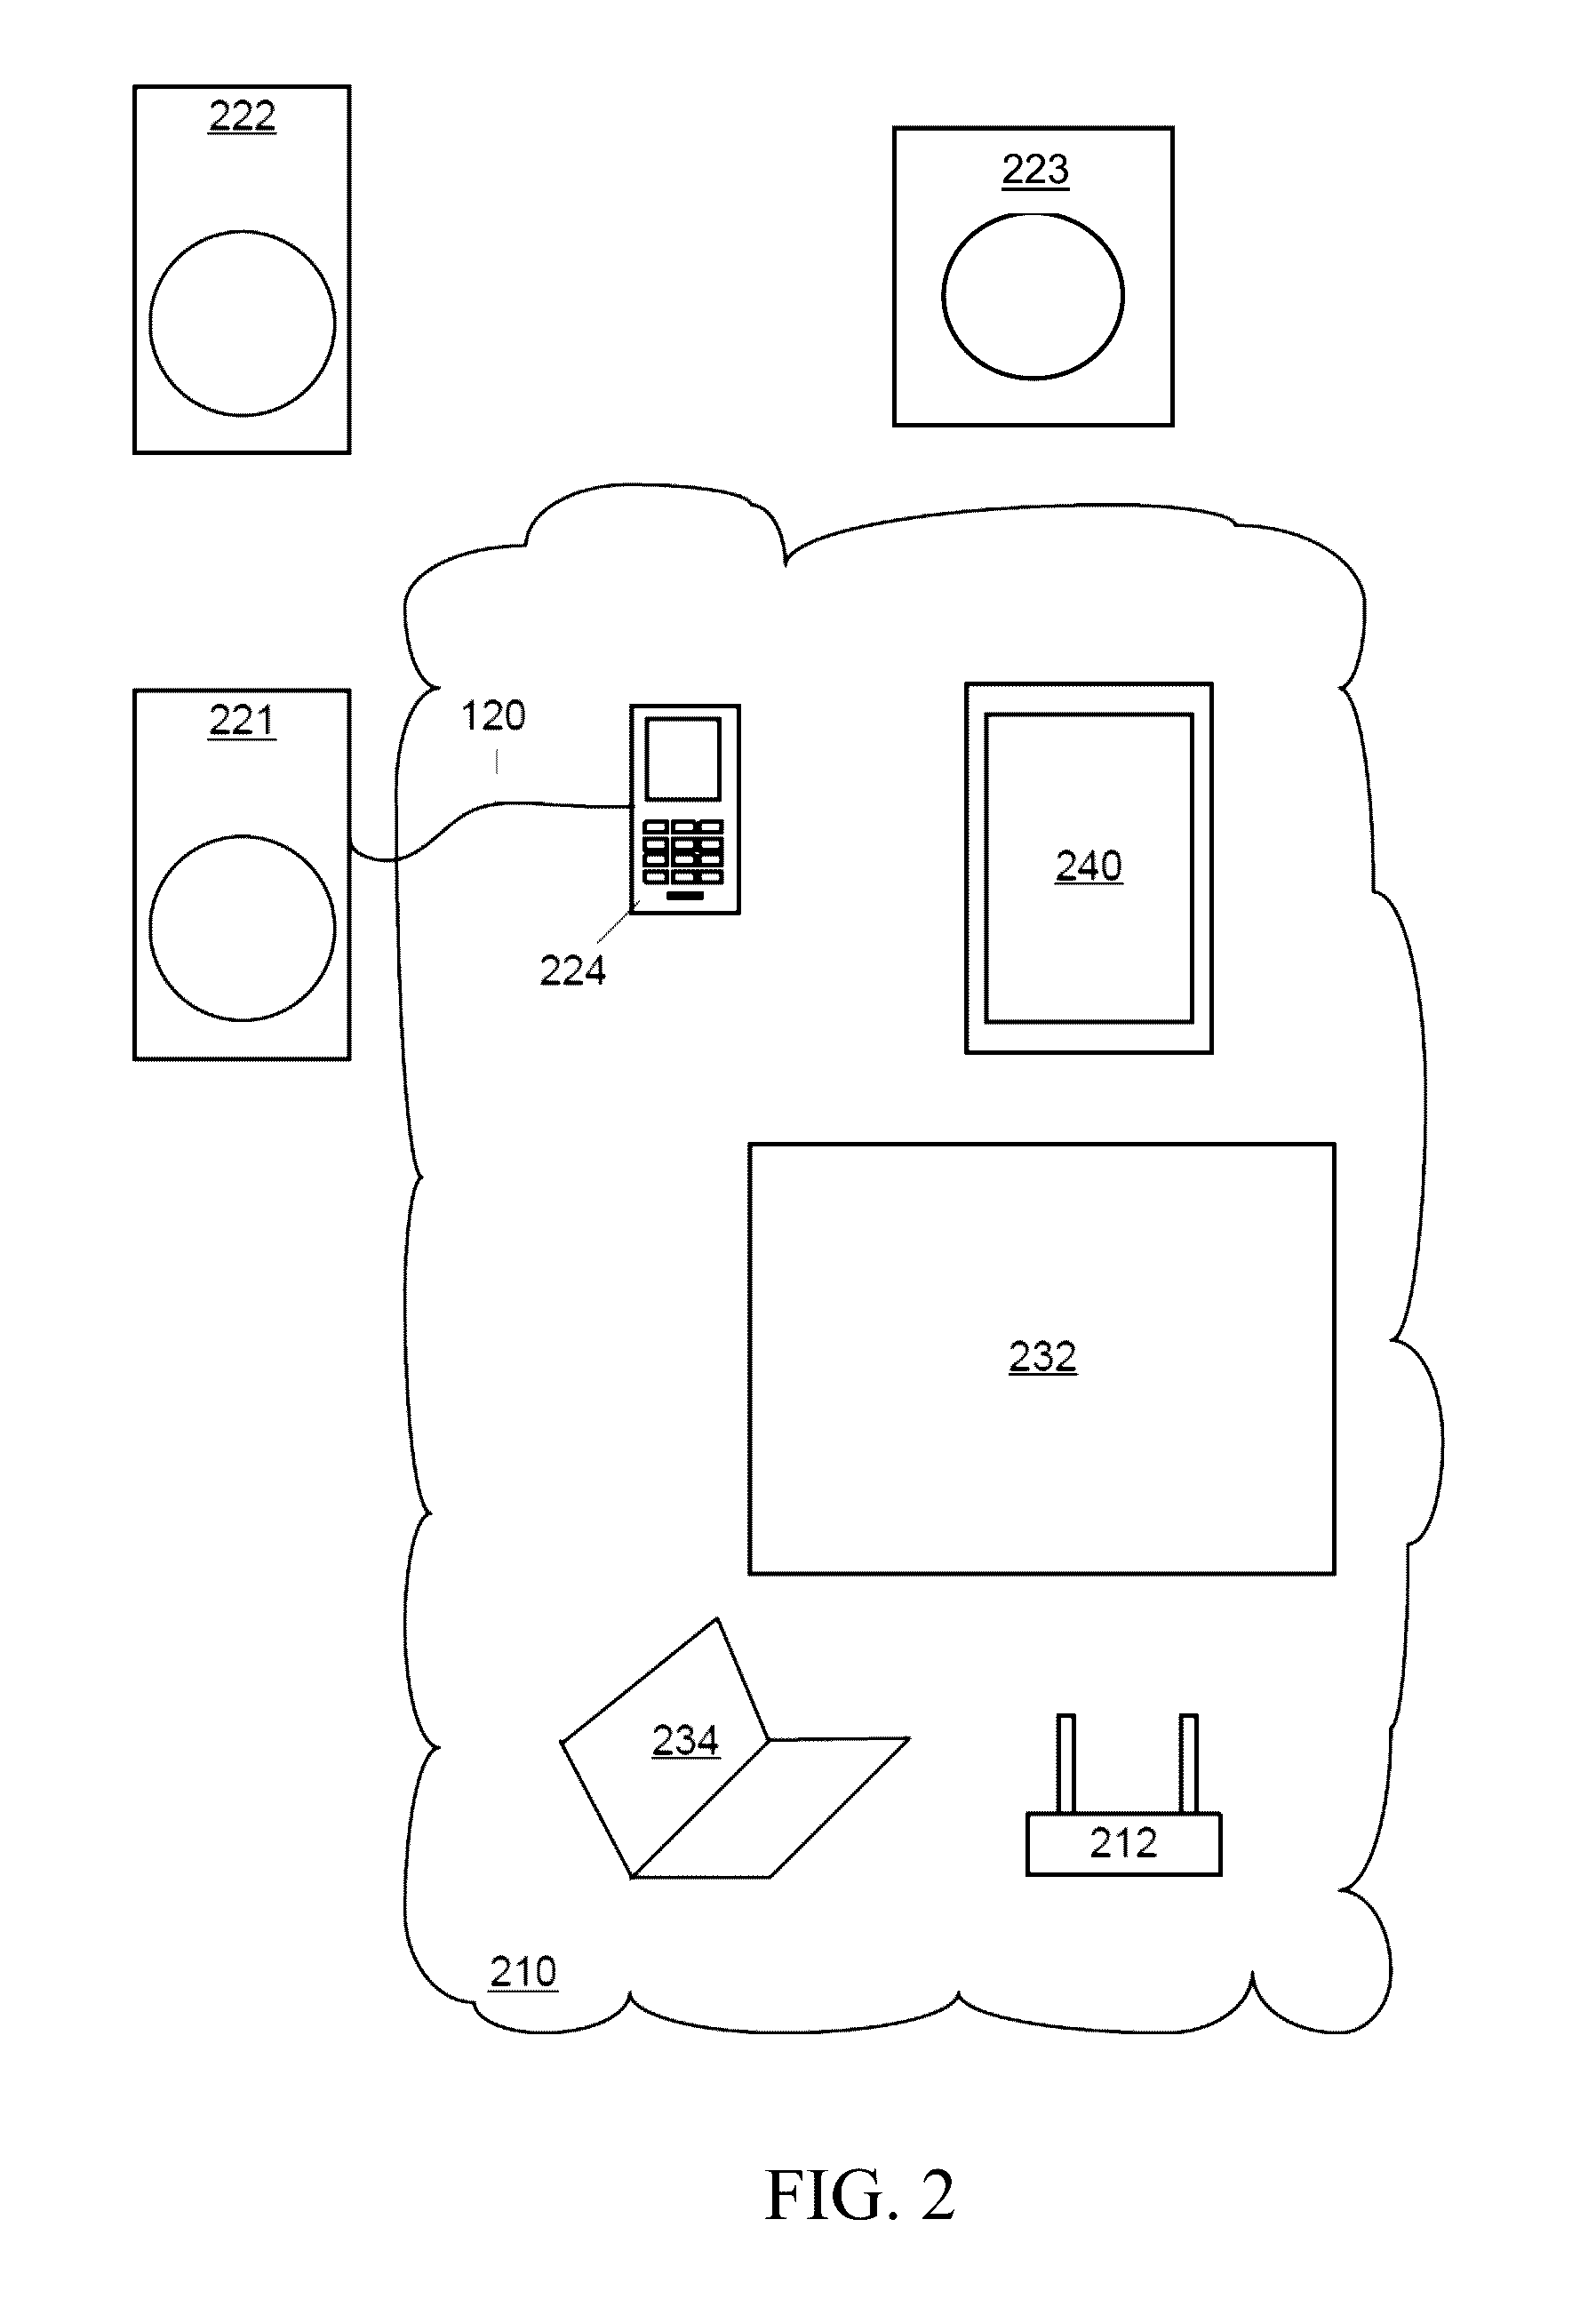 Method, System and Interface for Controlling a Subwoofer in a Networked Audio System